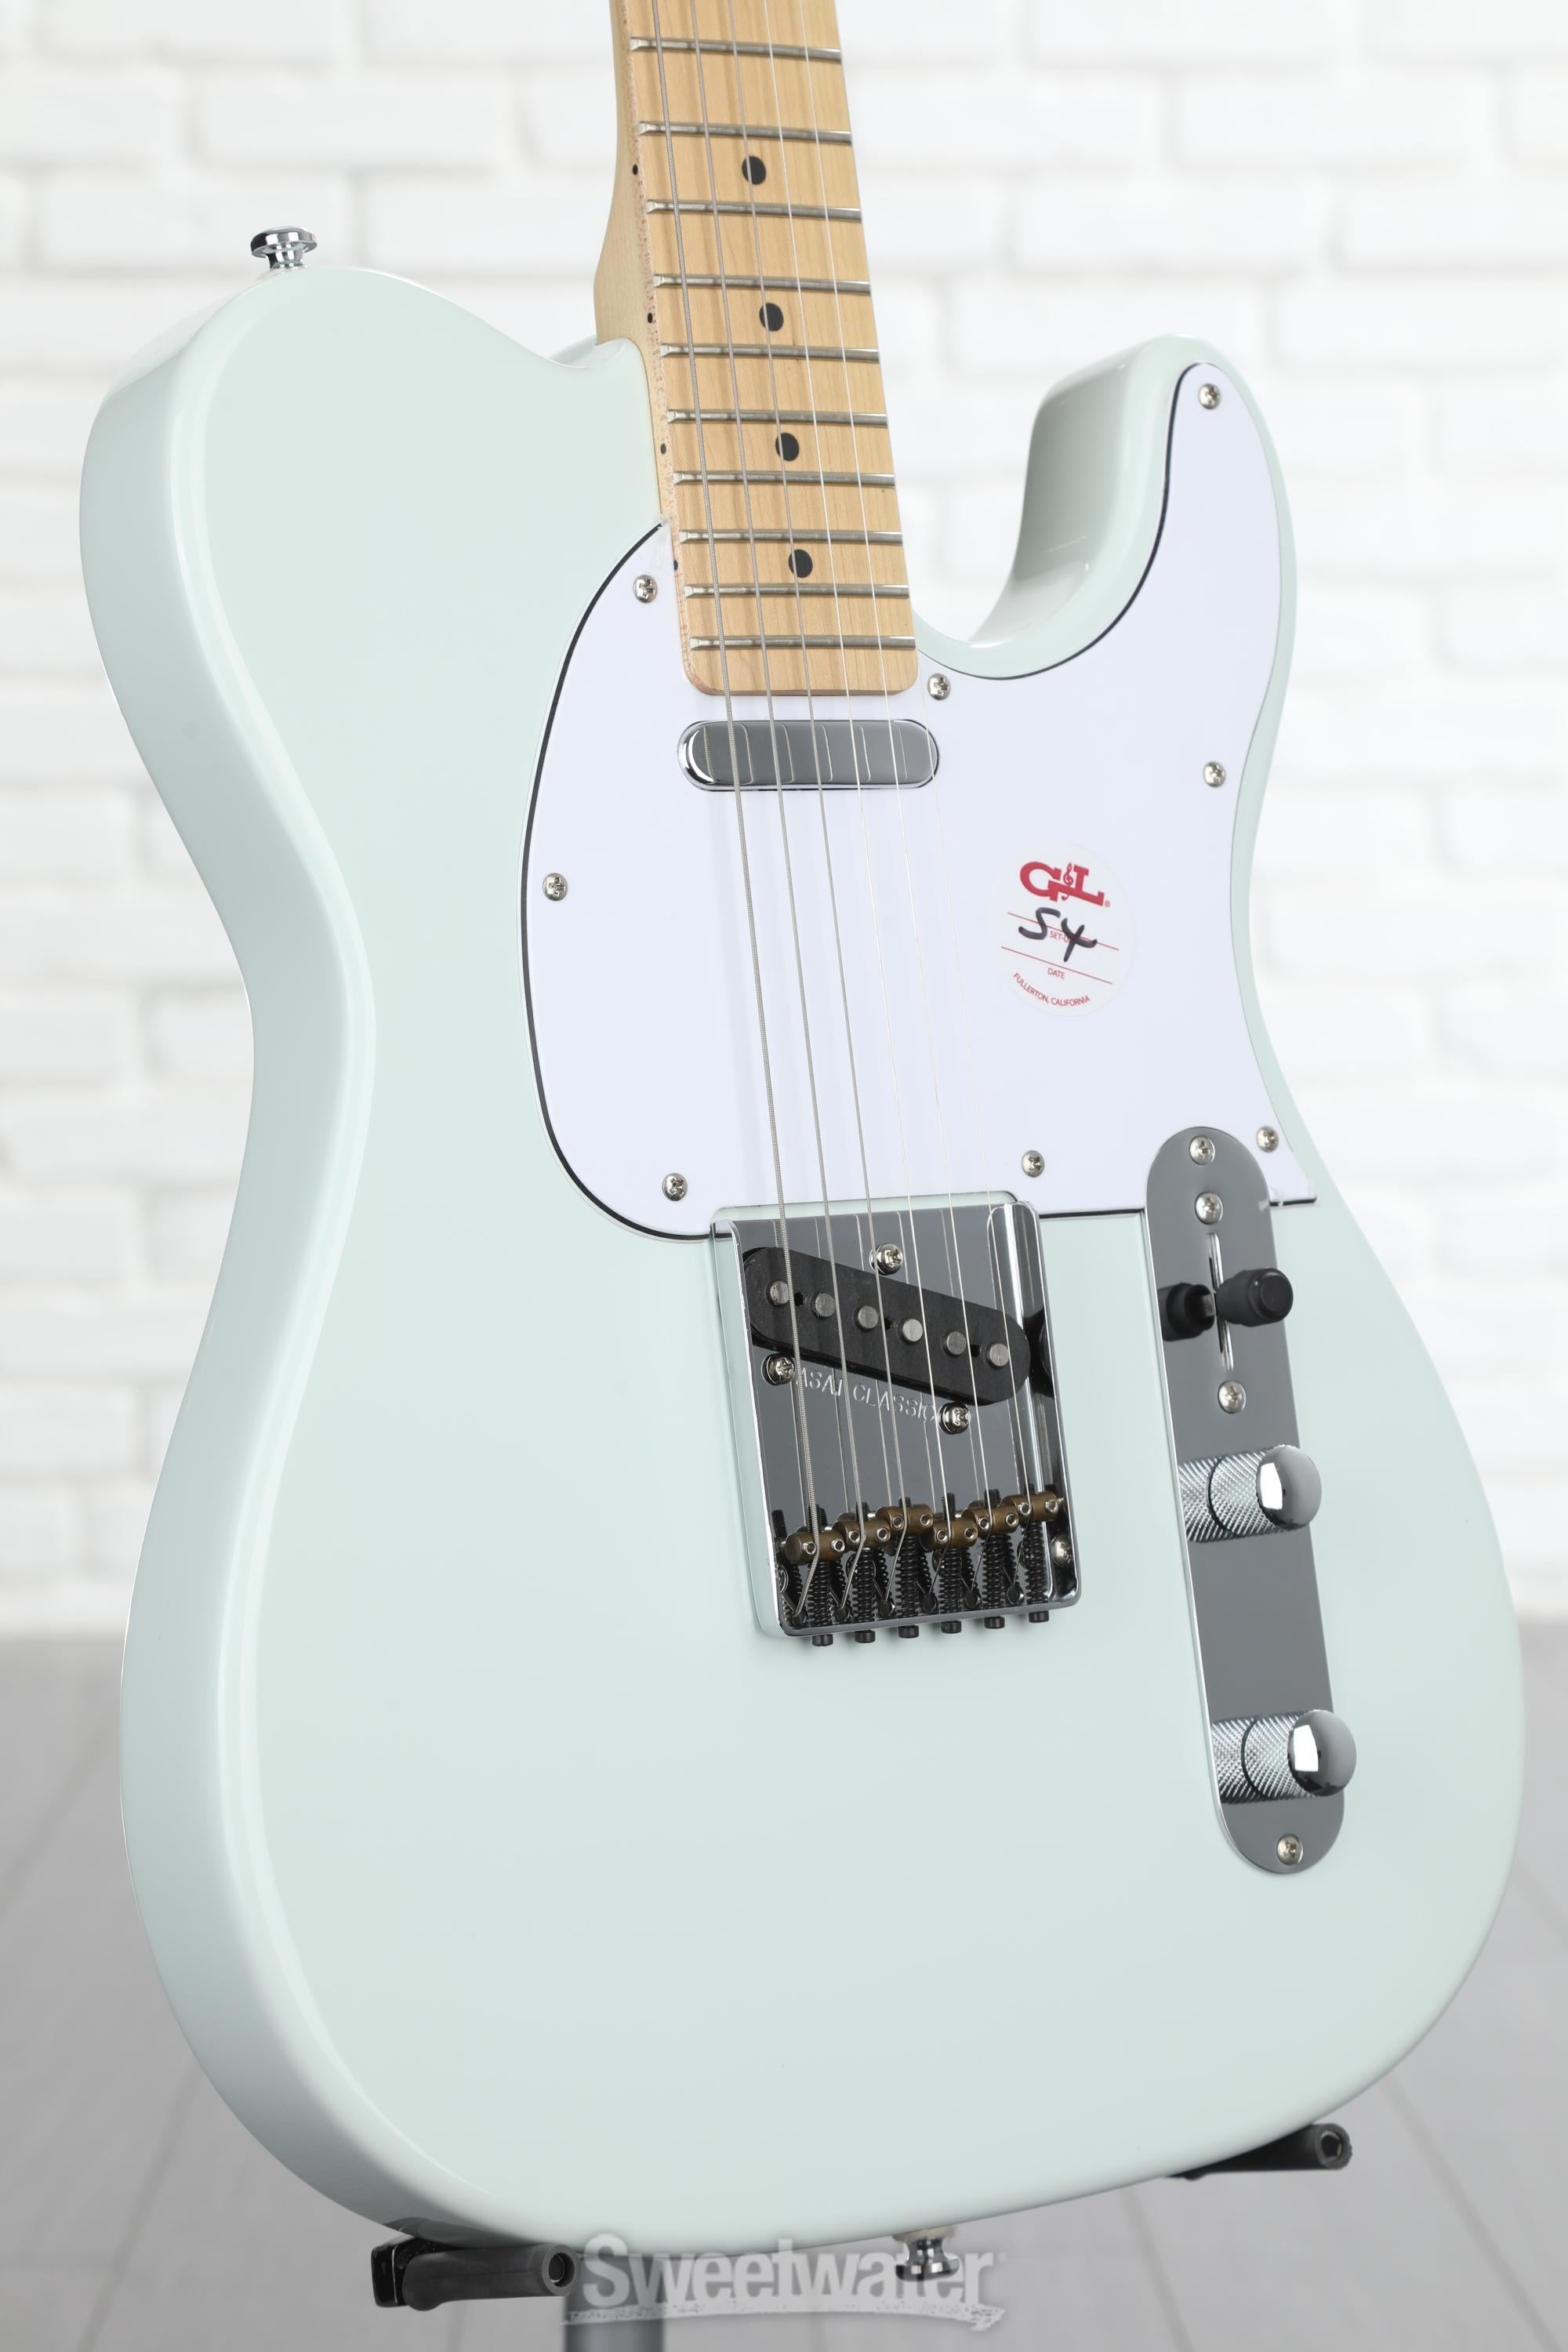 G&L Tribute ASAT Classic Special Edition Electric Guitar - Sonic Blue